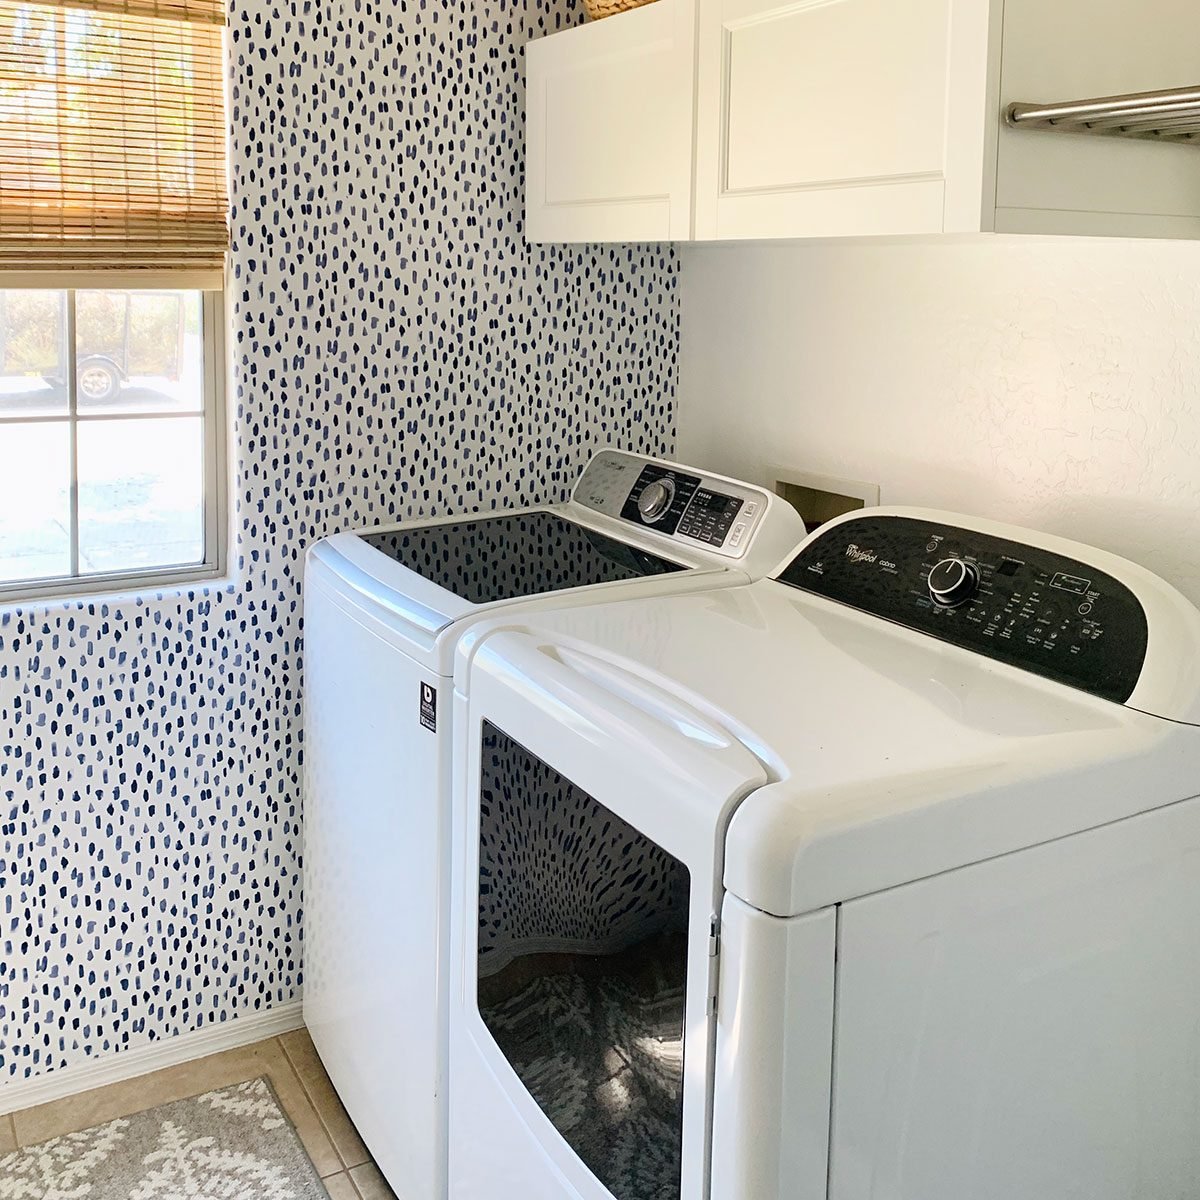 10 Unique Ways to Personalize Your Laundry Room